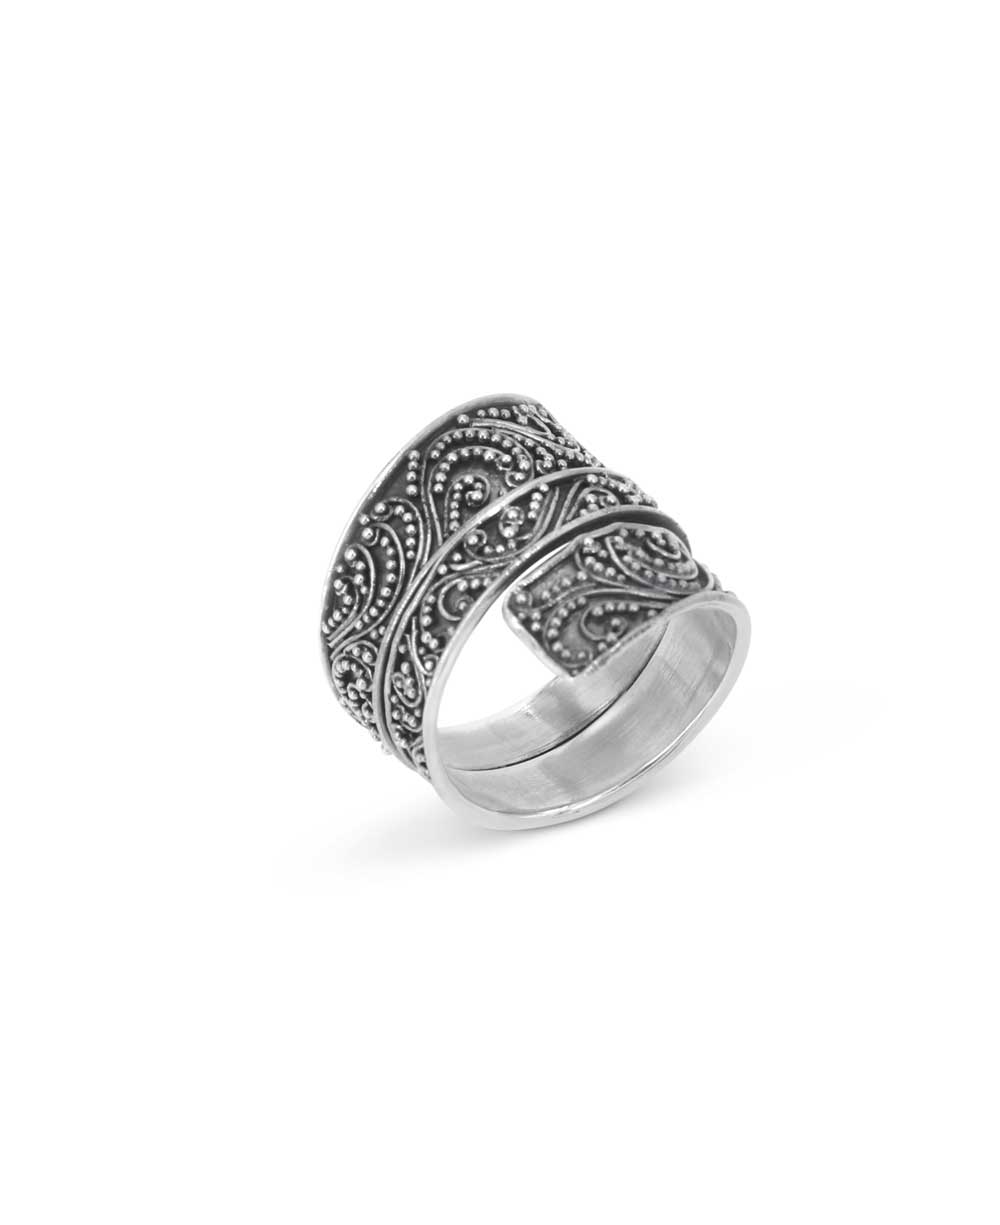 Sterling silver ring with beadwork